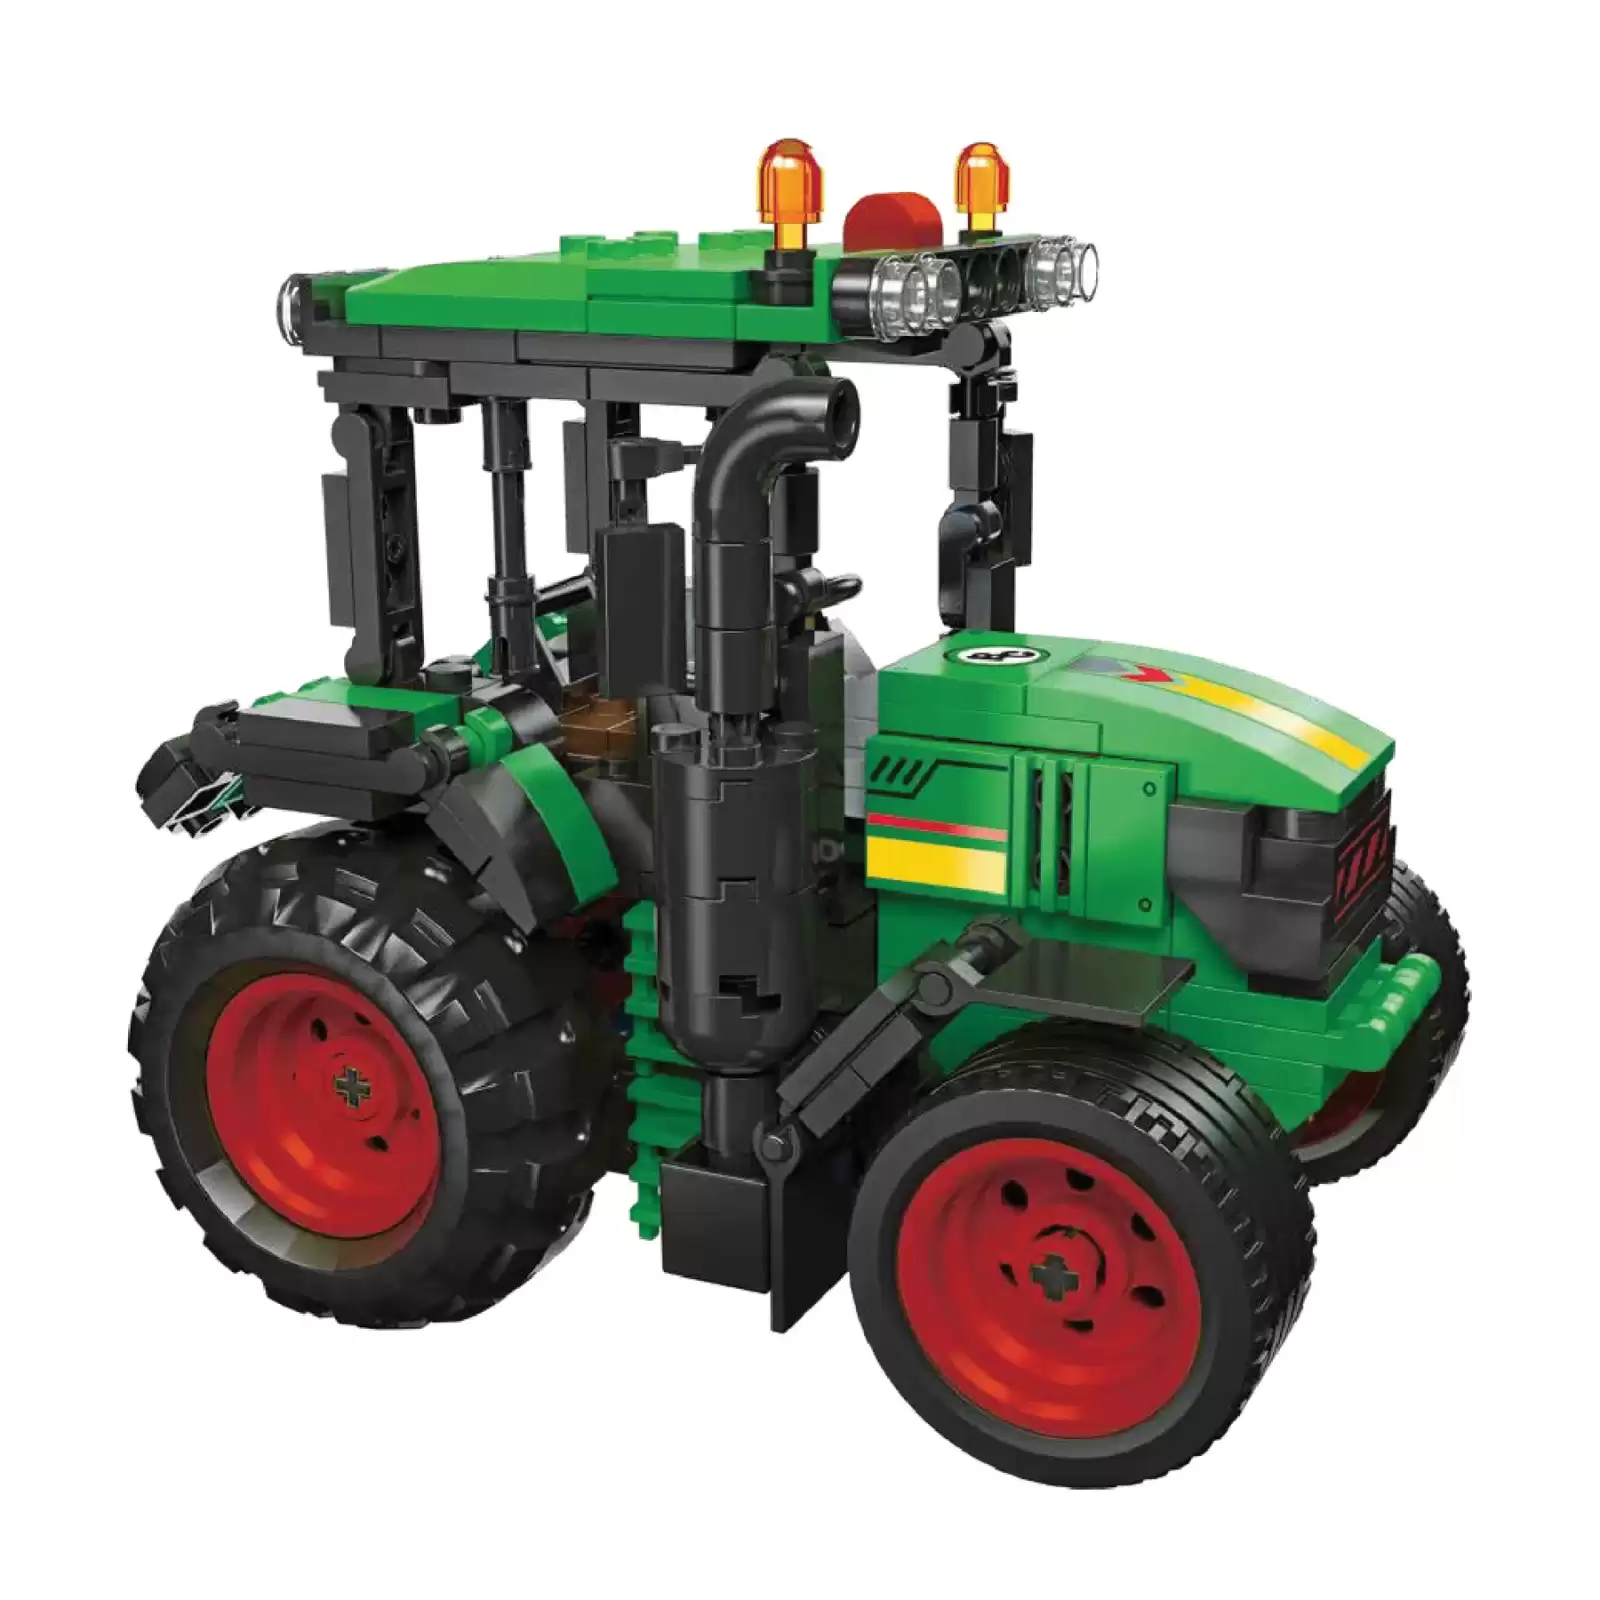 BIG COUNTRY TOYS Building Blocks – Tractor